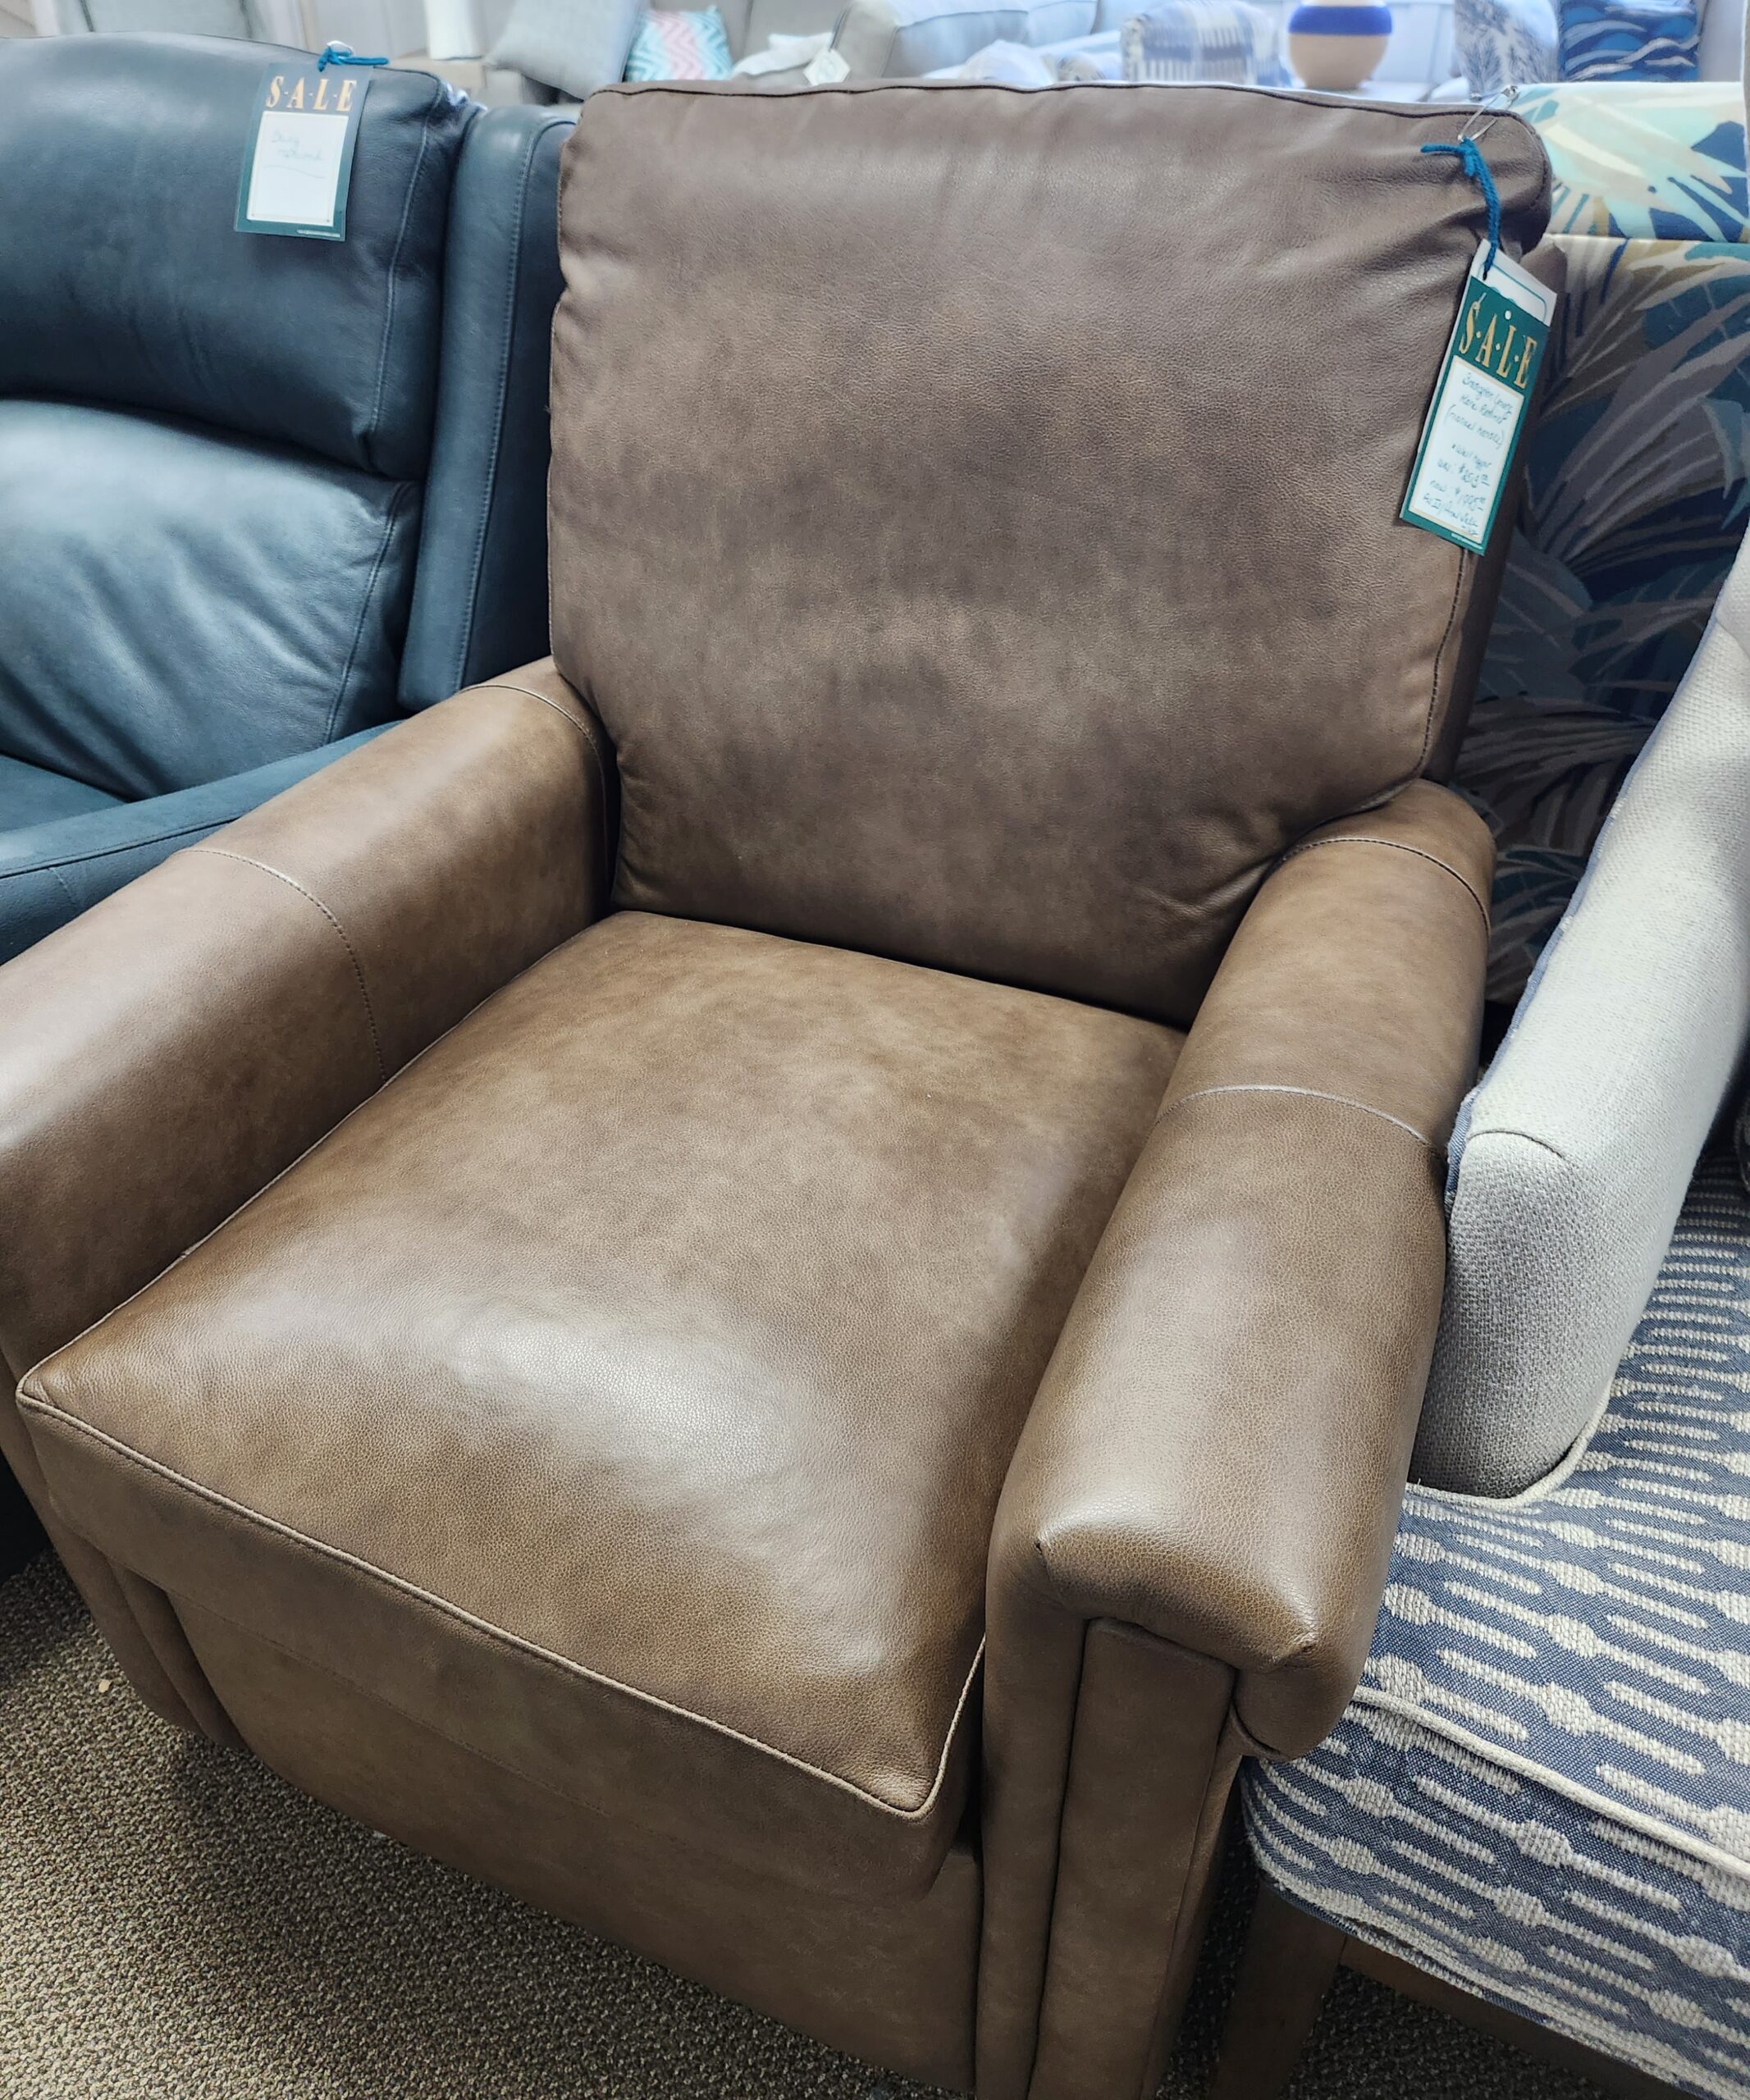 a close up of a recliner with pillows on it